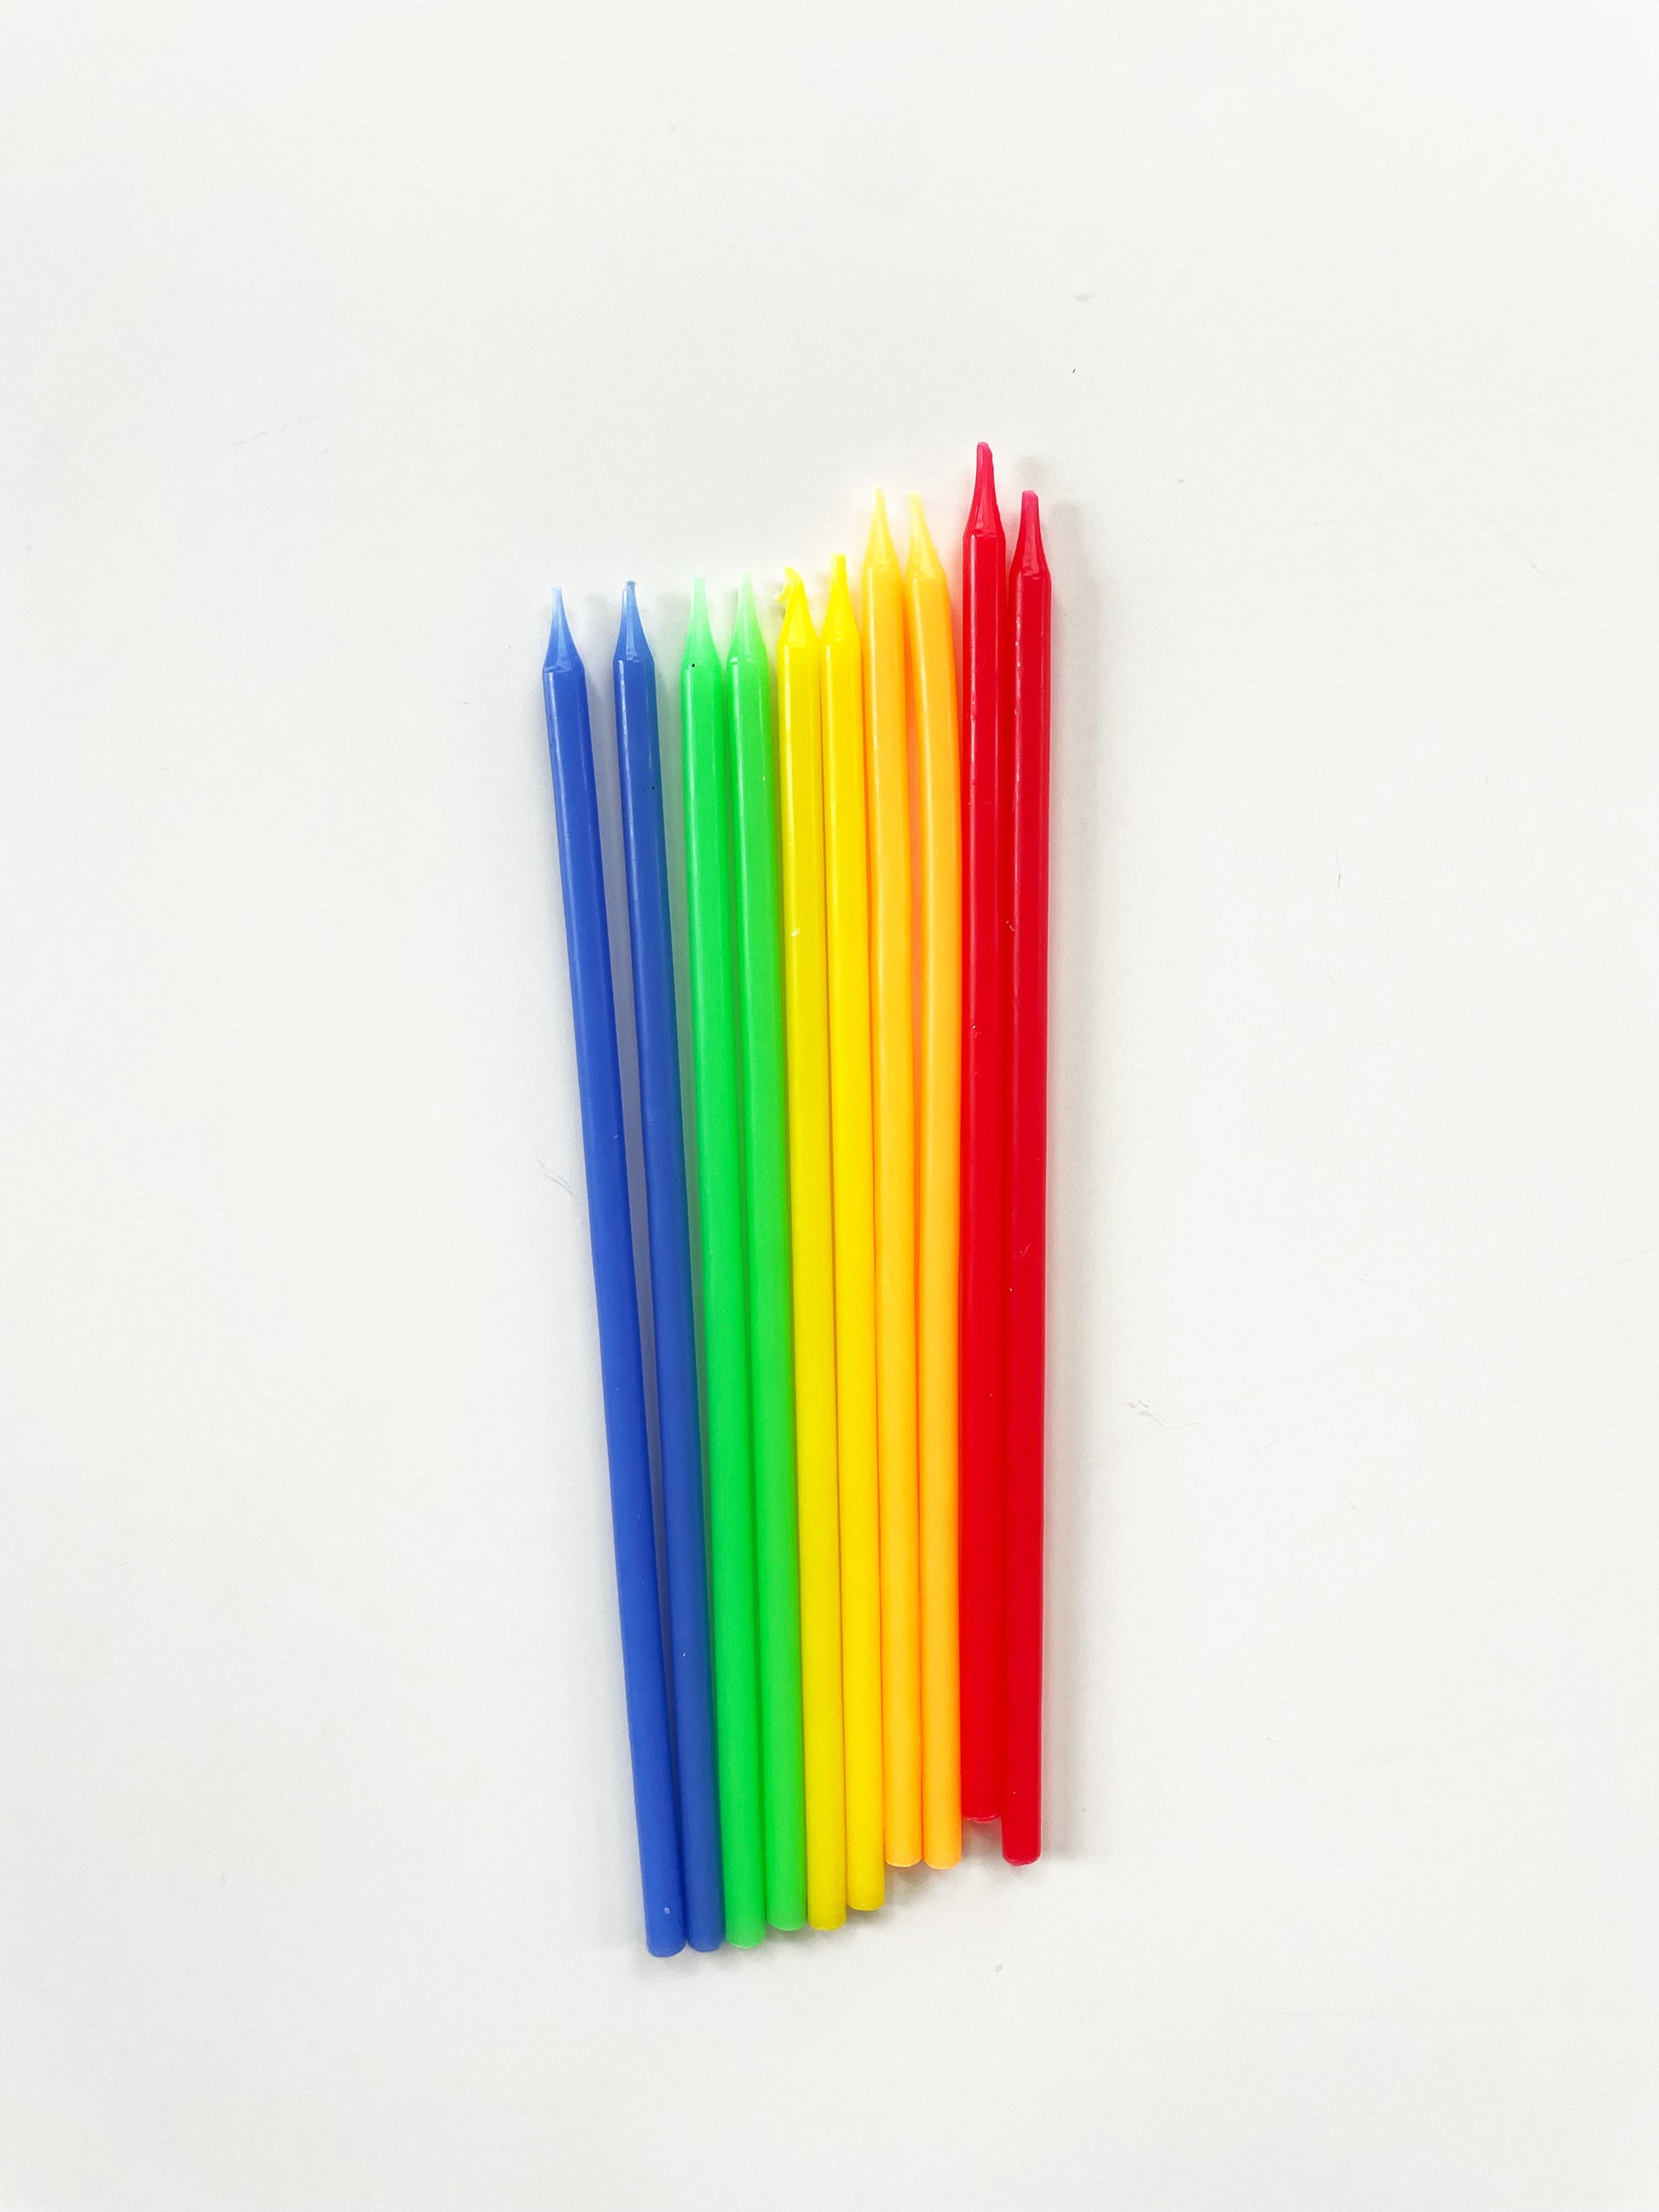 Ten tall rainbow birthday cake candles in yellow, red, green and blue.